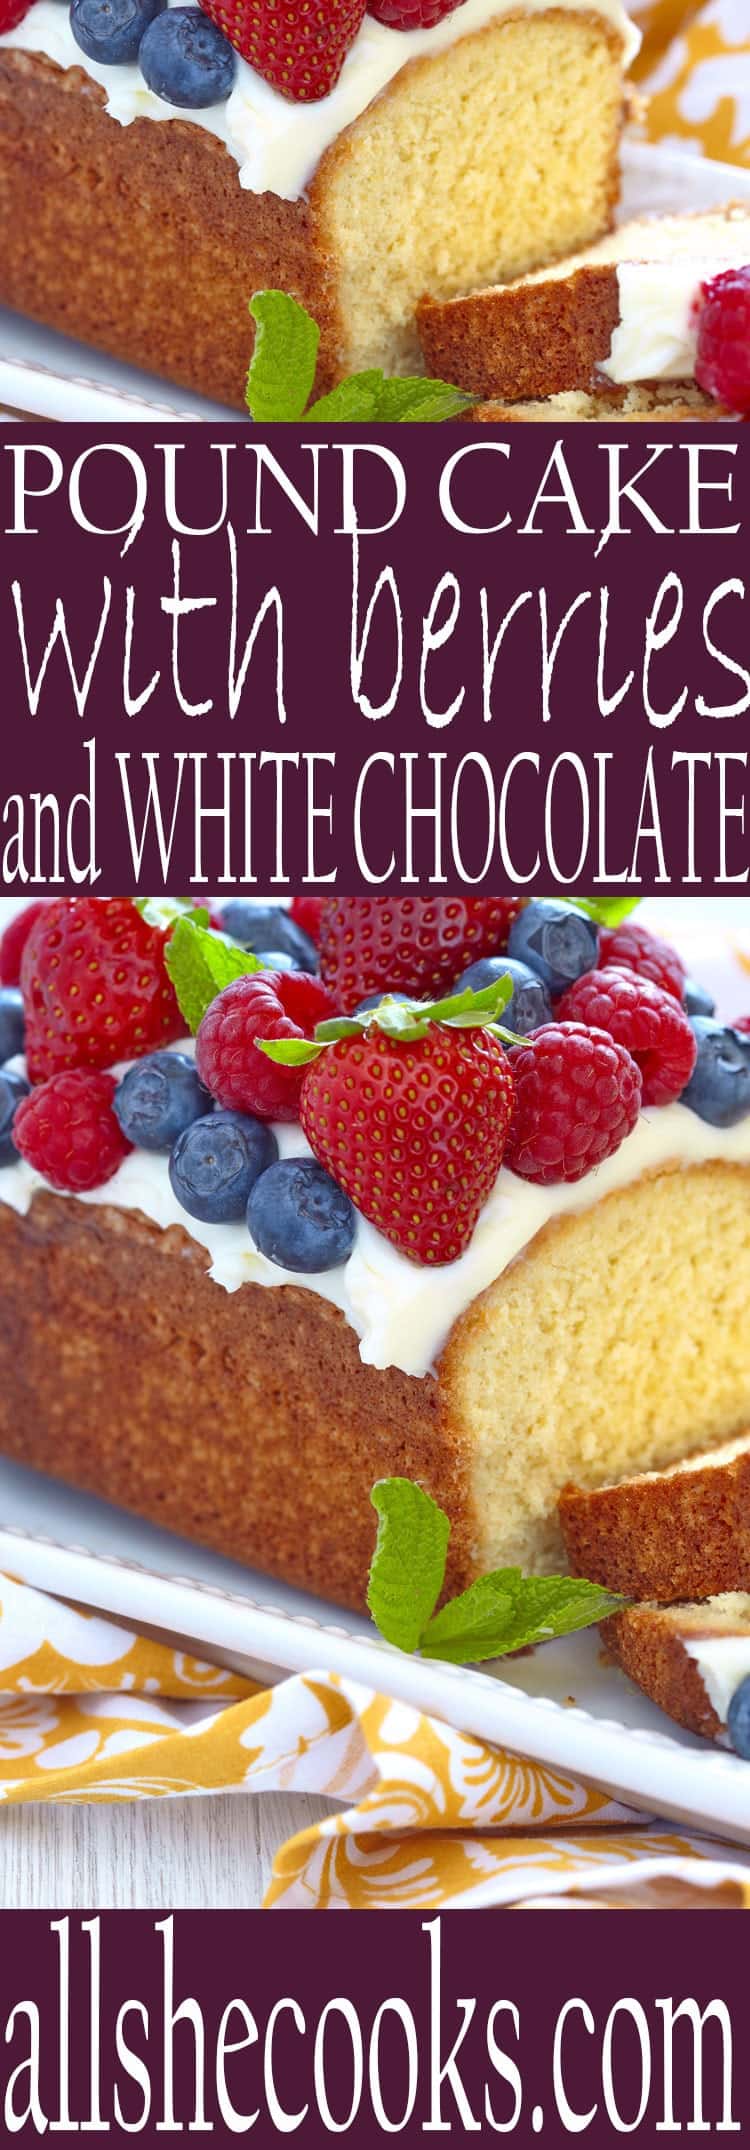 Make pound cake with berries and white chocolate sauce as a strawberry shortcake alternative. This easy and delicious dessert is worth savoring.